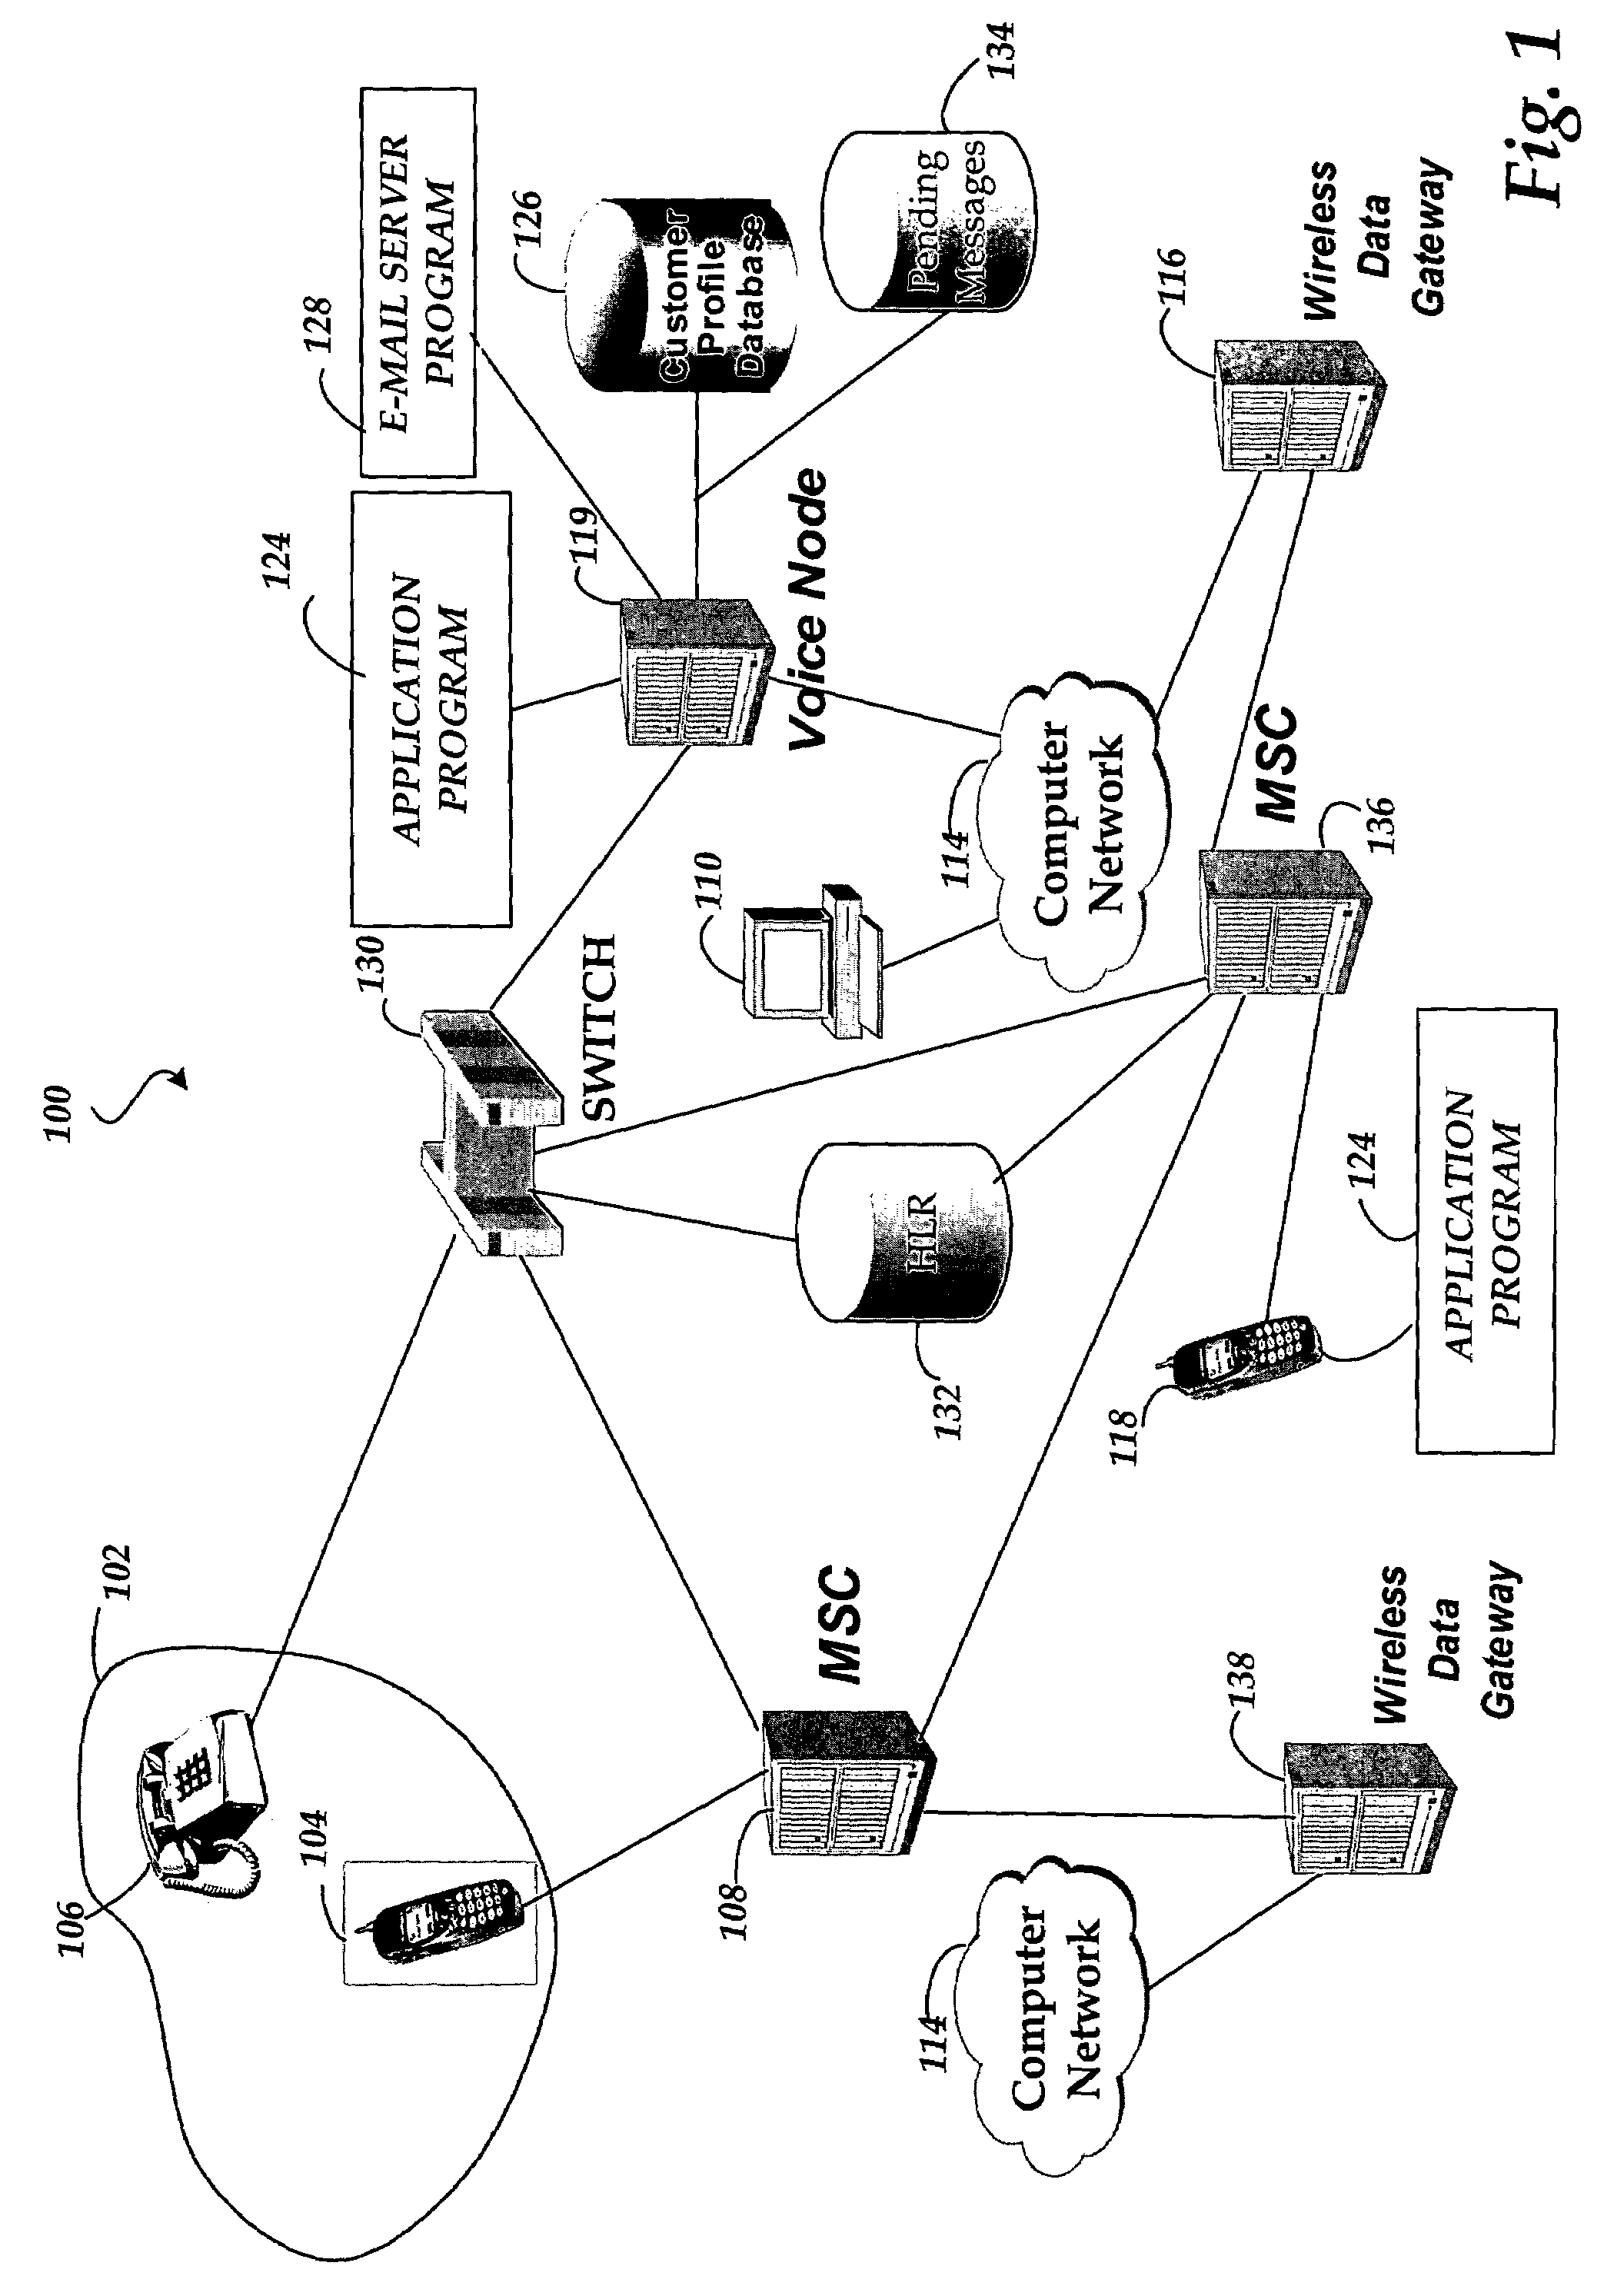 Methods and systems for remotely securing data in a wireless device in a communications network